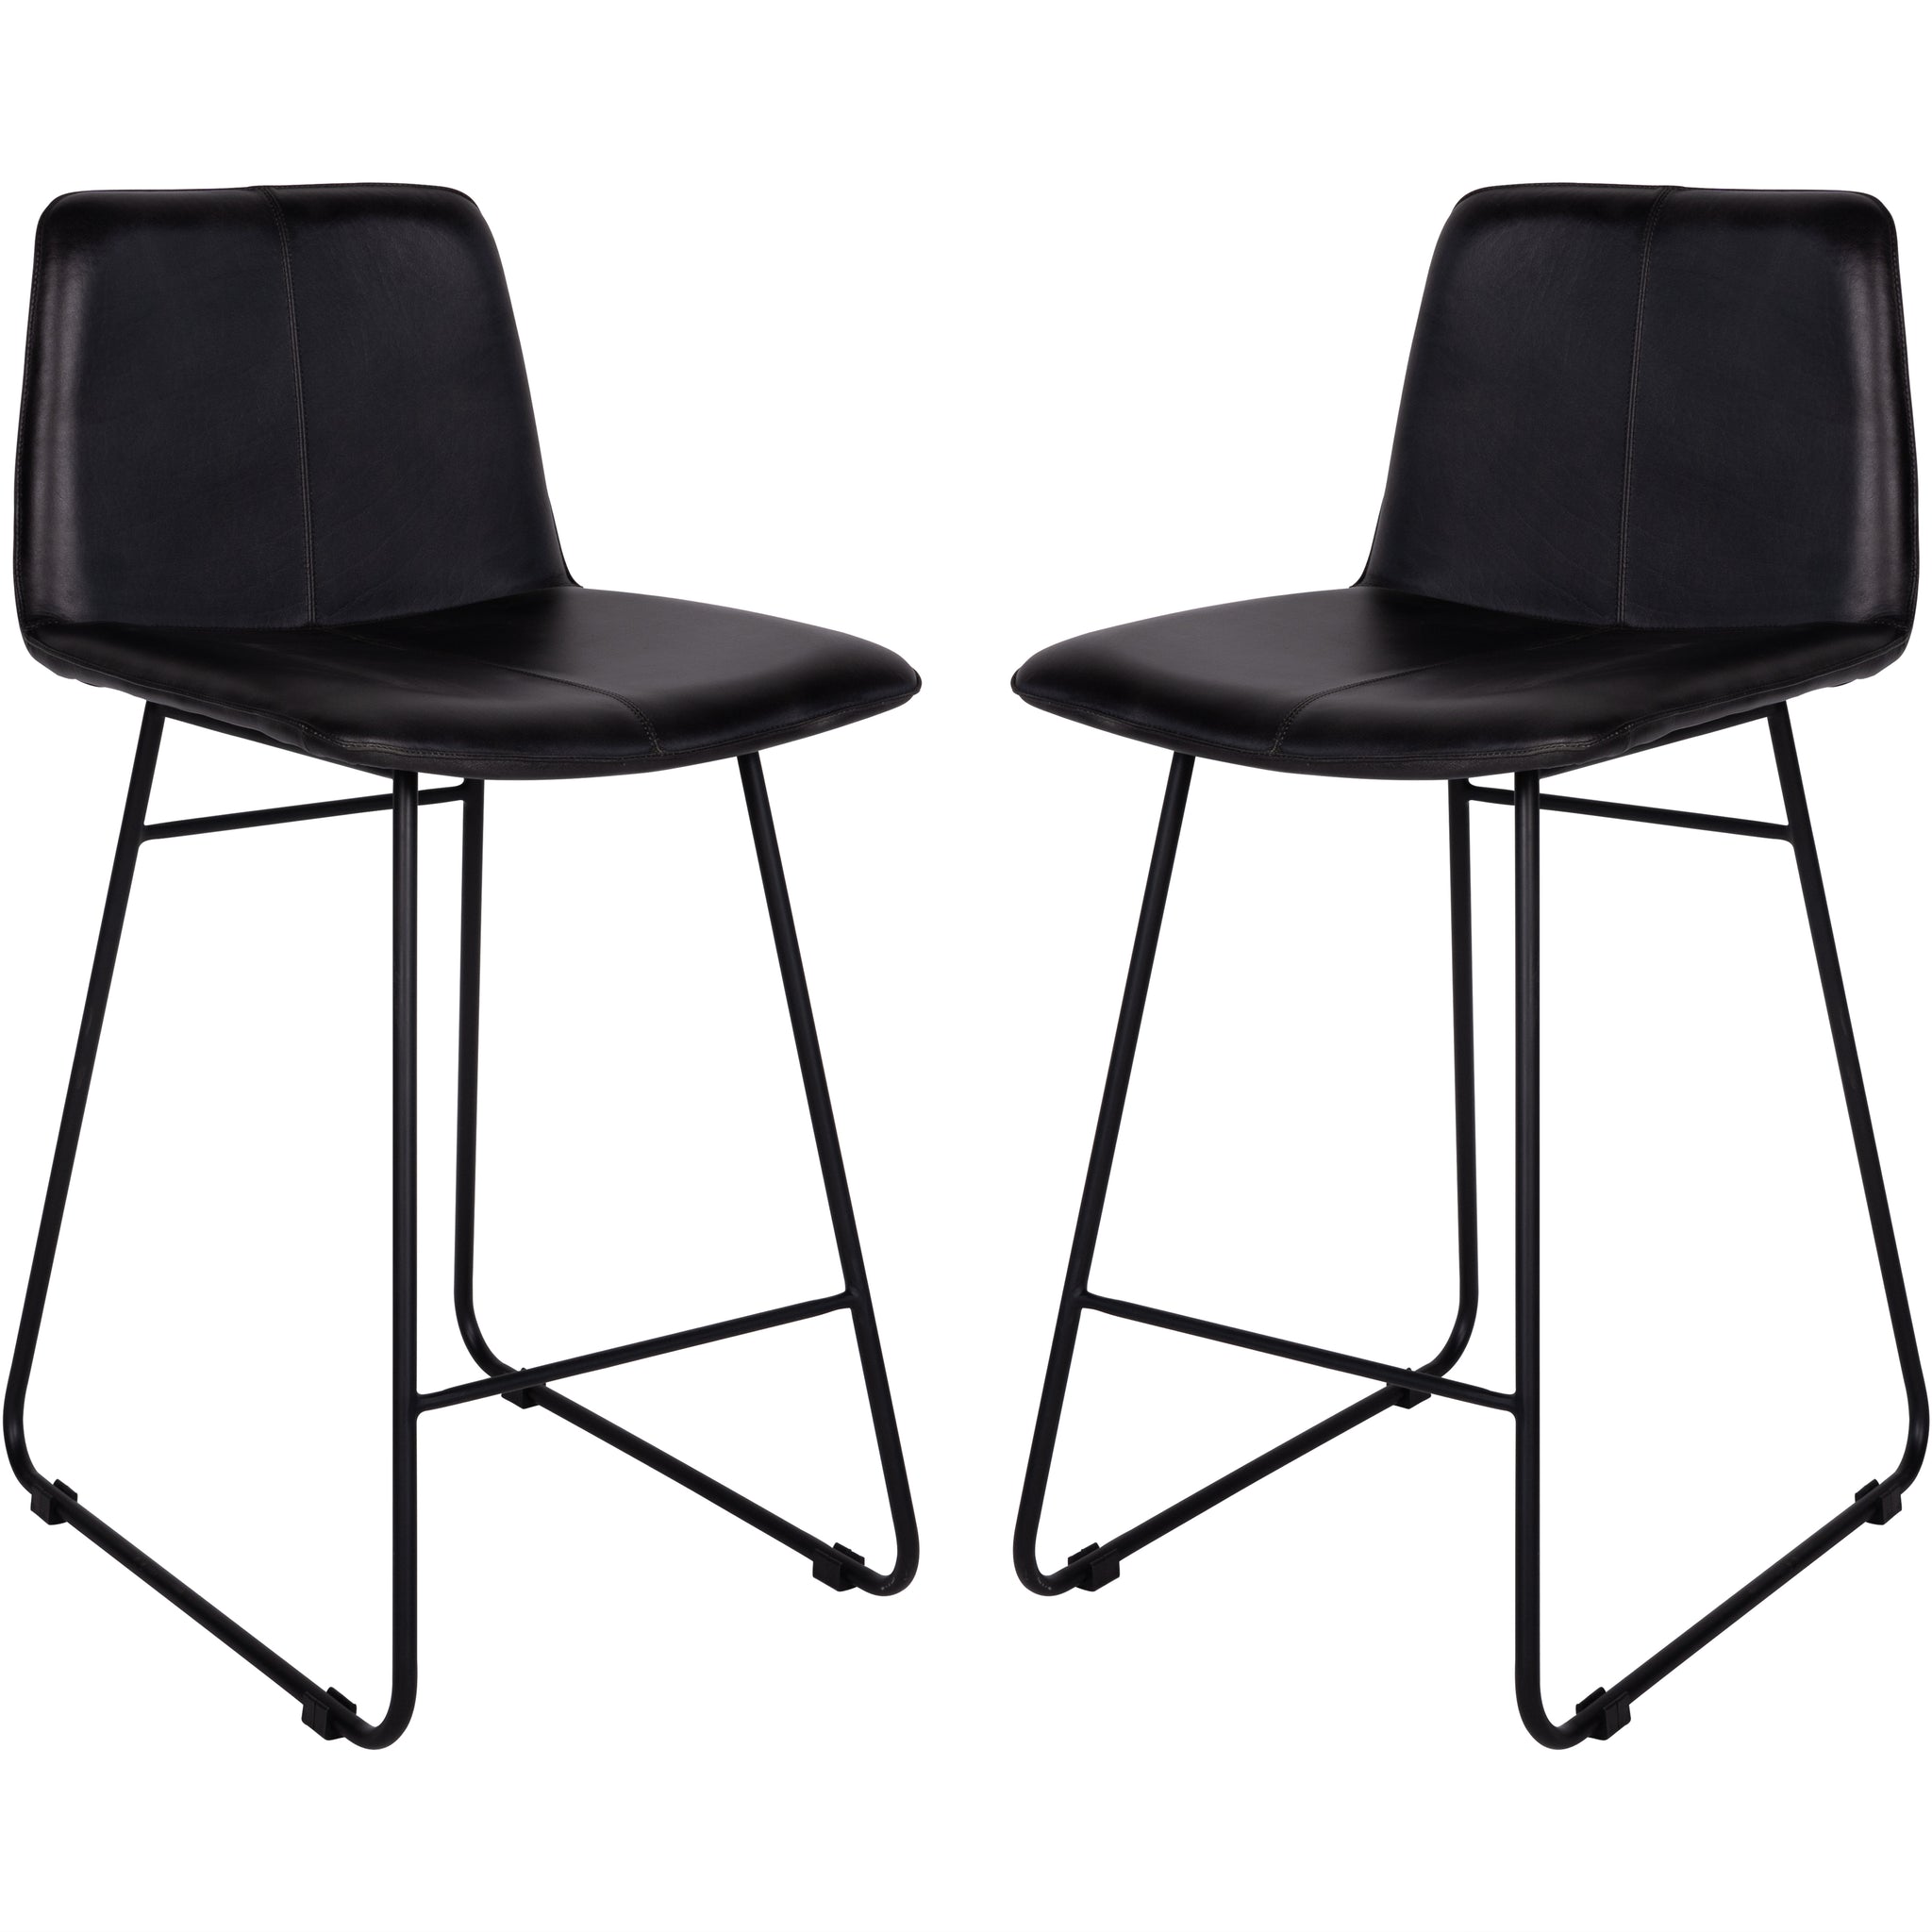 Set of 2 Baskin Leather Bar Stools in Charcoal